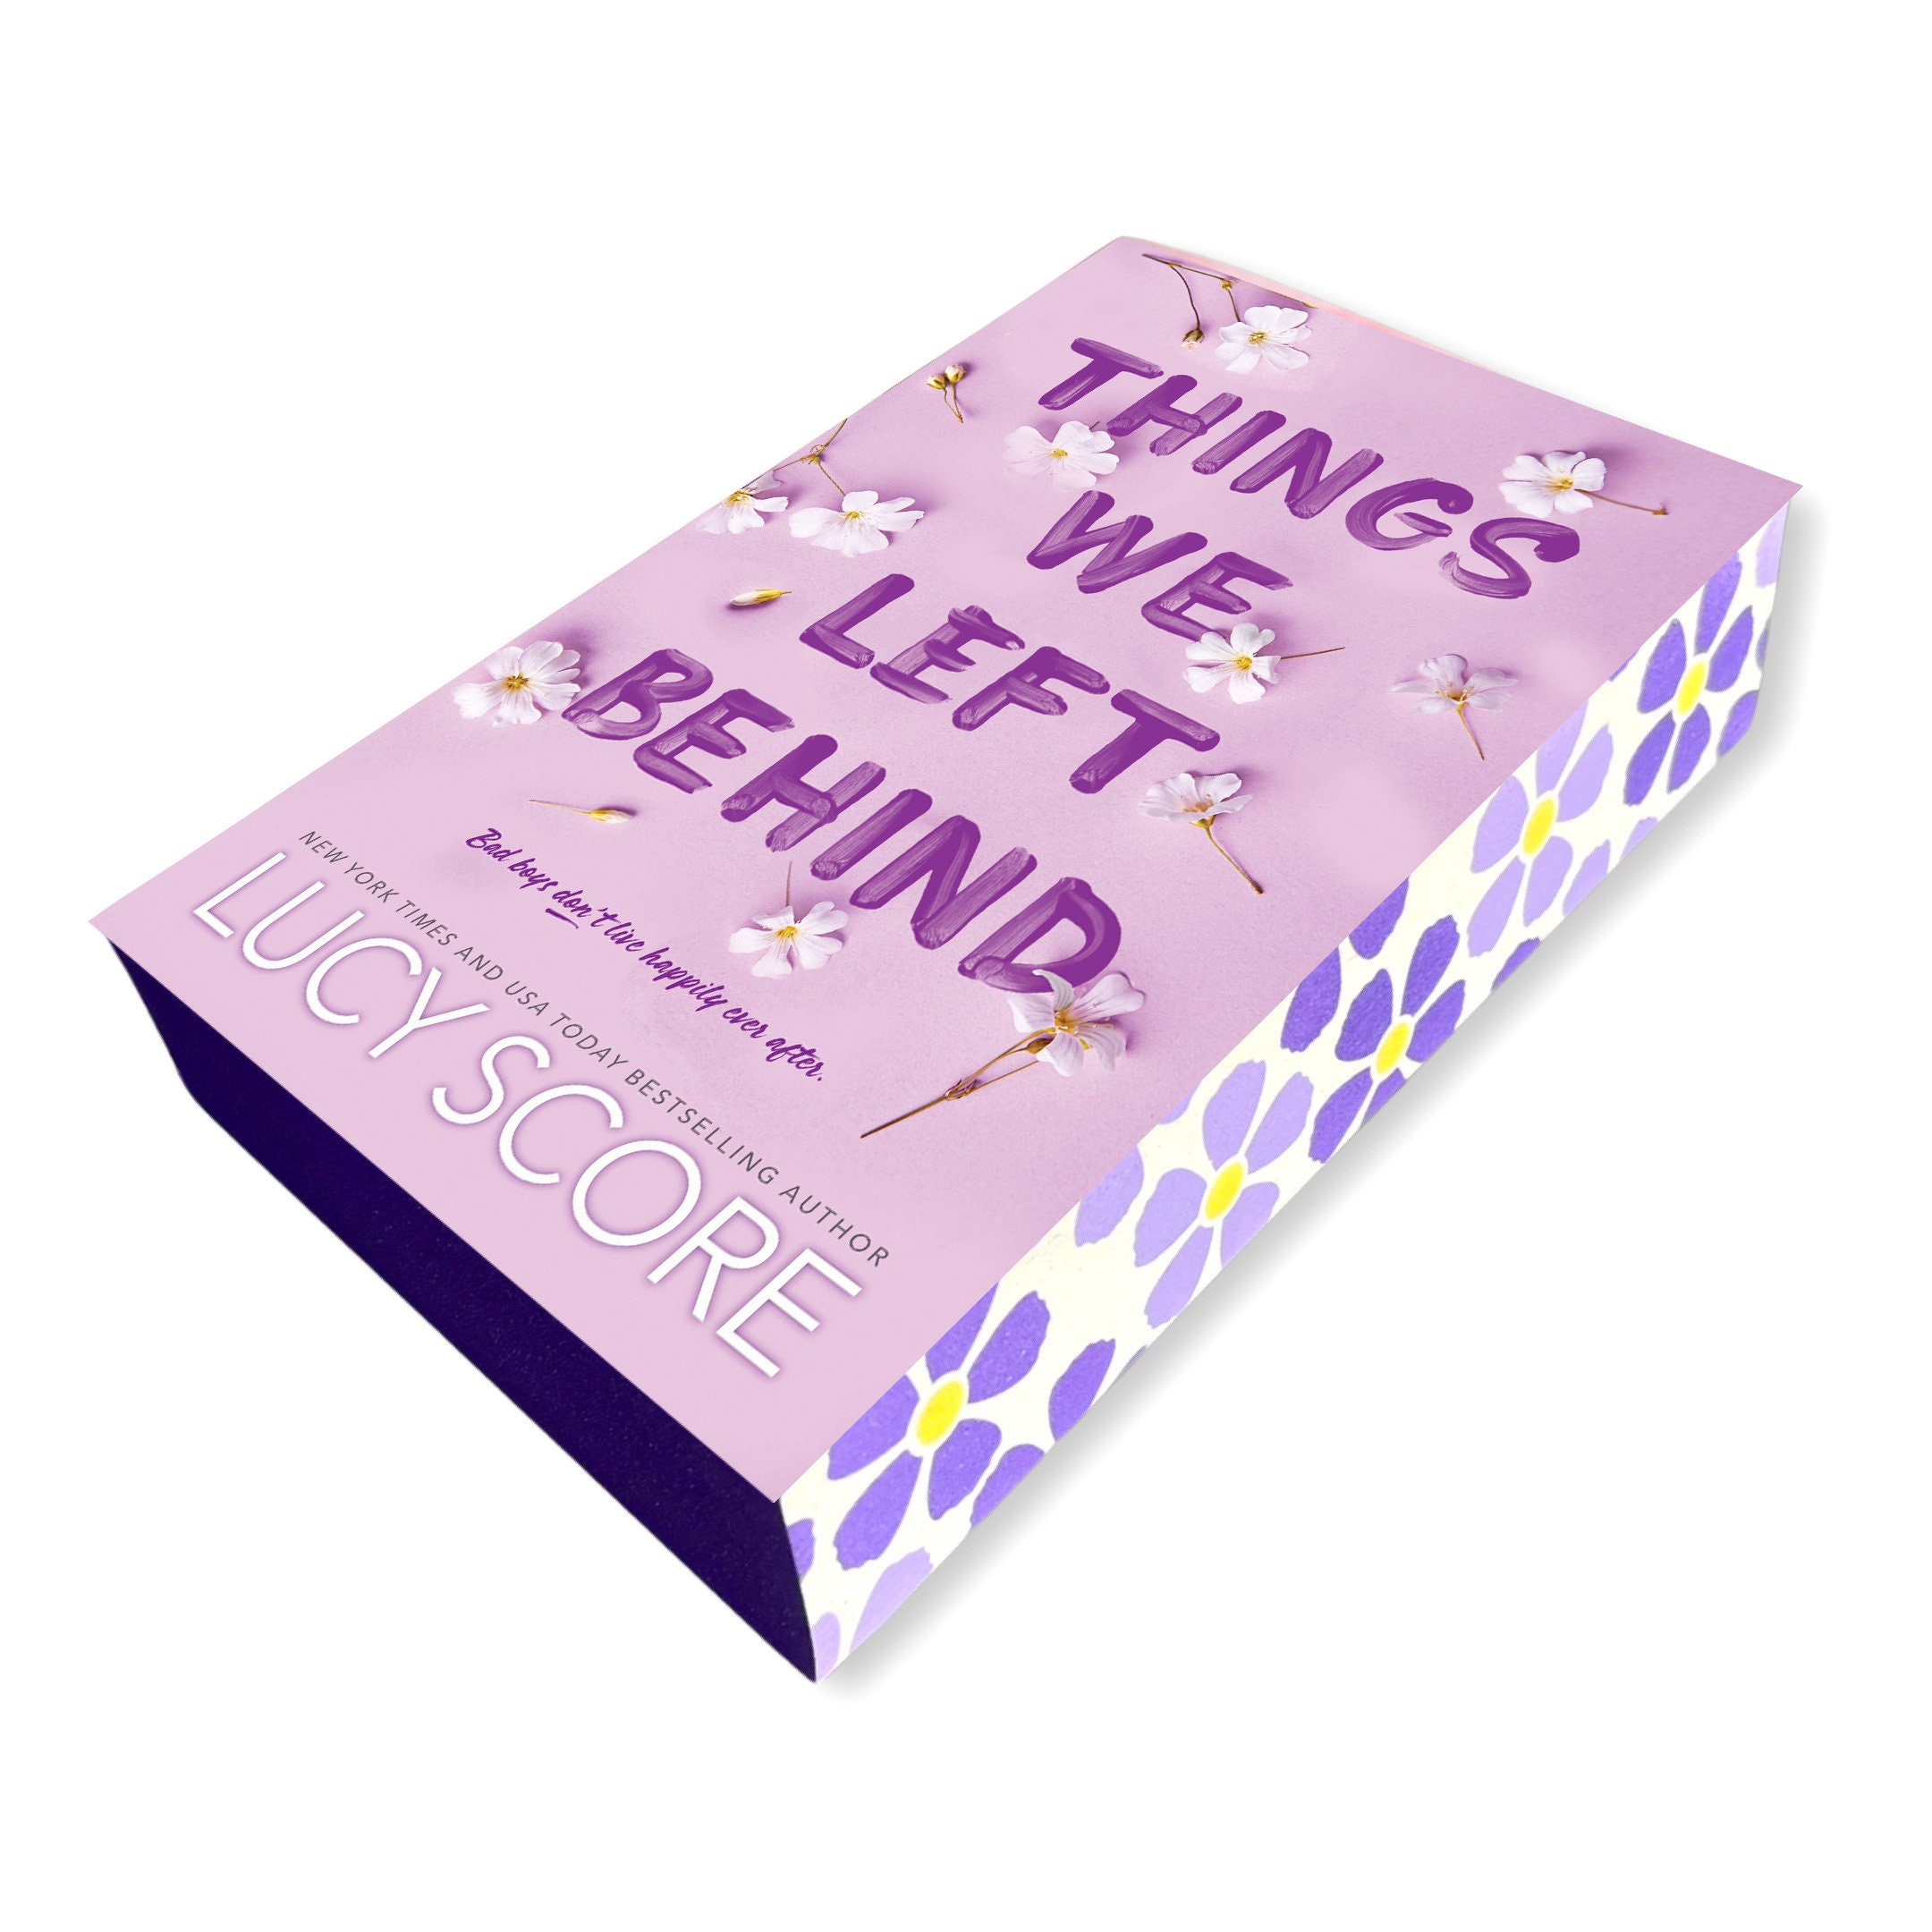 Things We Never Got Over by Lucy Score: FAQs + Books Like It